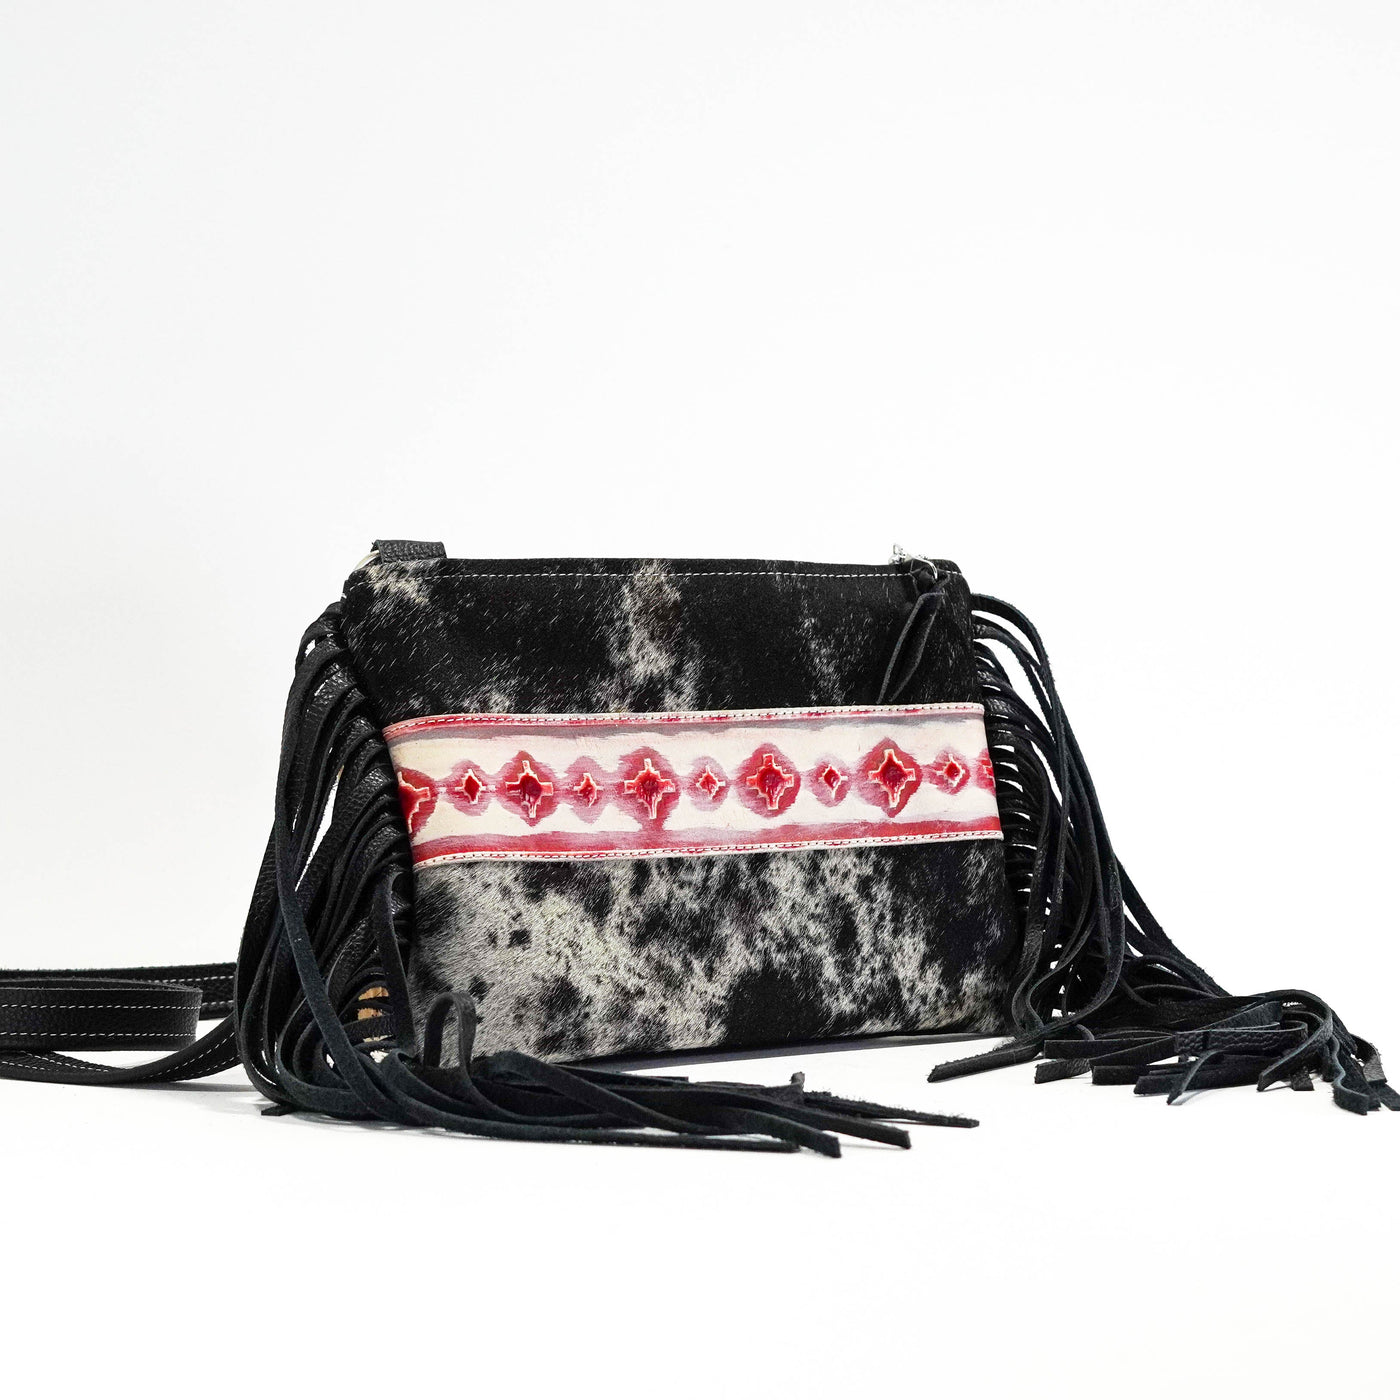 Patsy - Black & White w/ Royston Navajo-Patsy-Western-Cowhide-Bags-Handmade-Products-Gifts-Dancing Cactus Designs